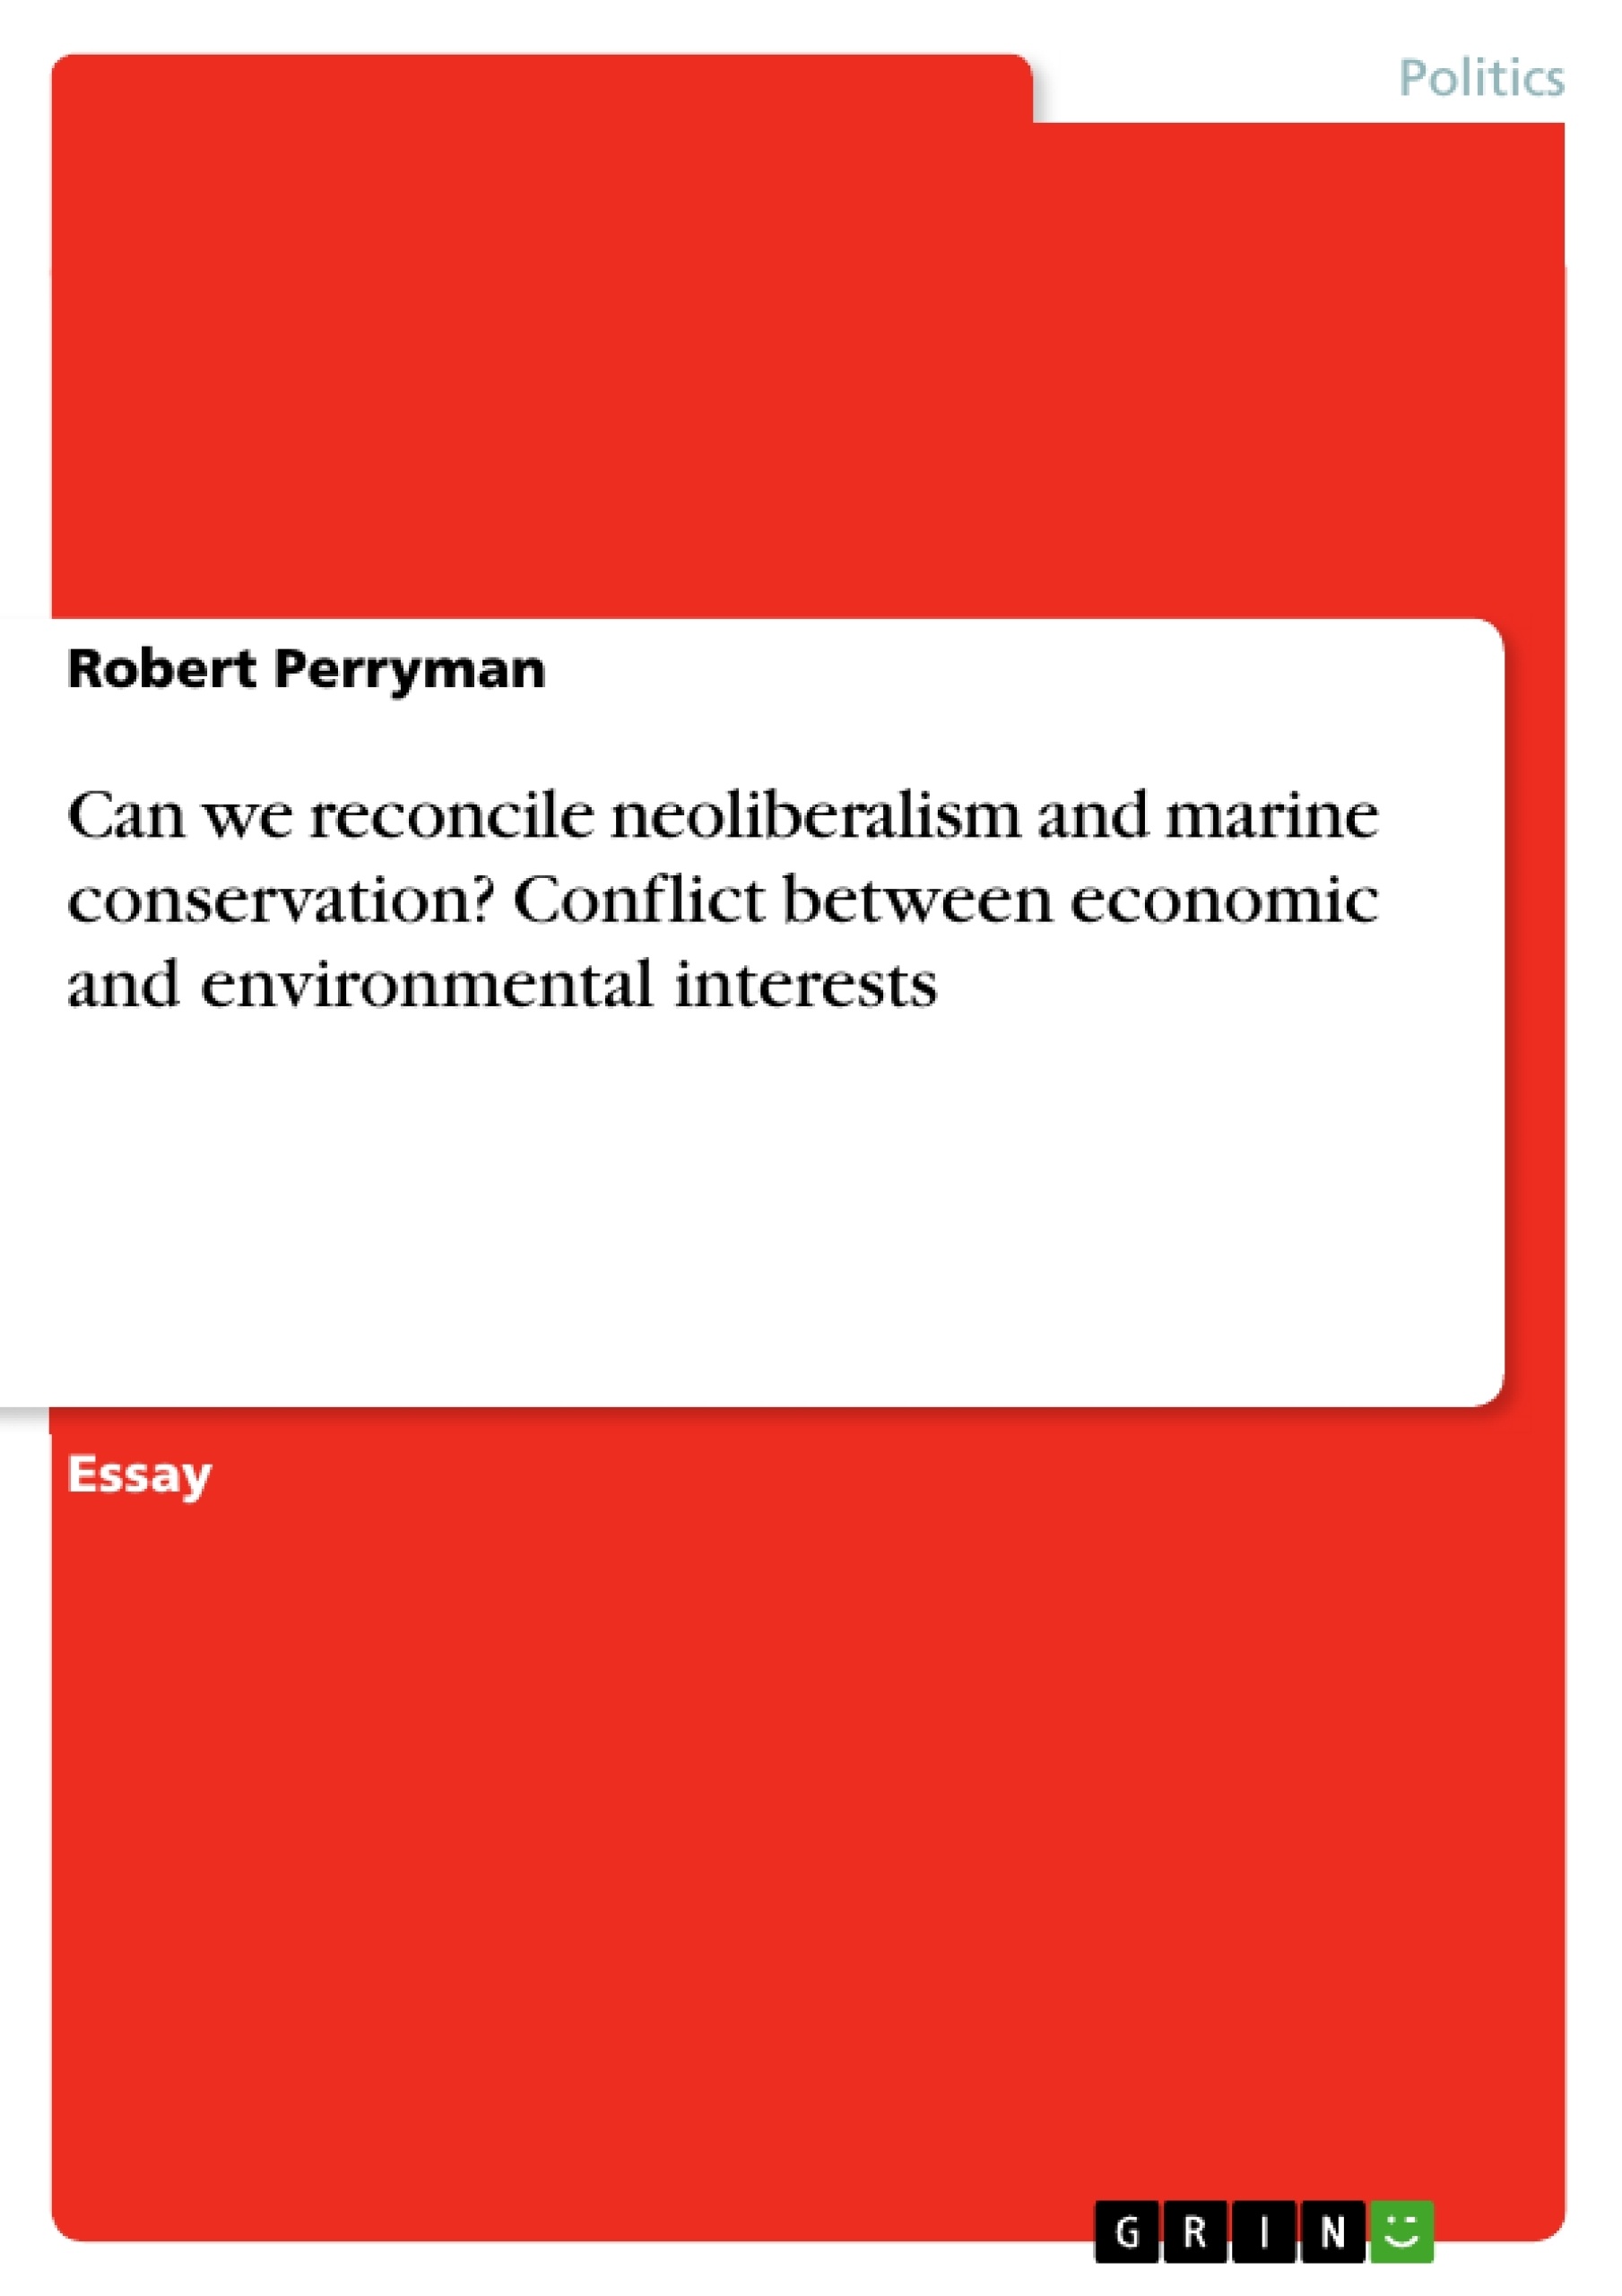 Título: Can we reconcile neoliberalism and marine conservation? Conflict between economic and environmental interests